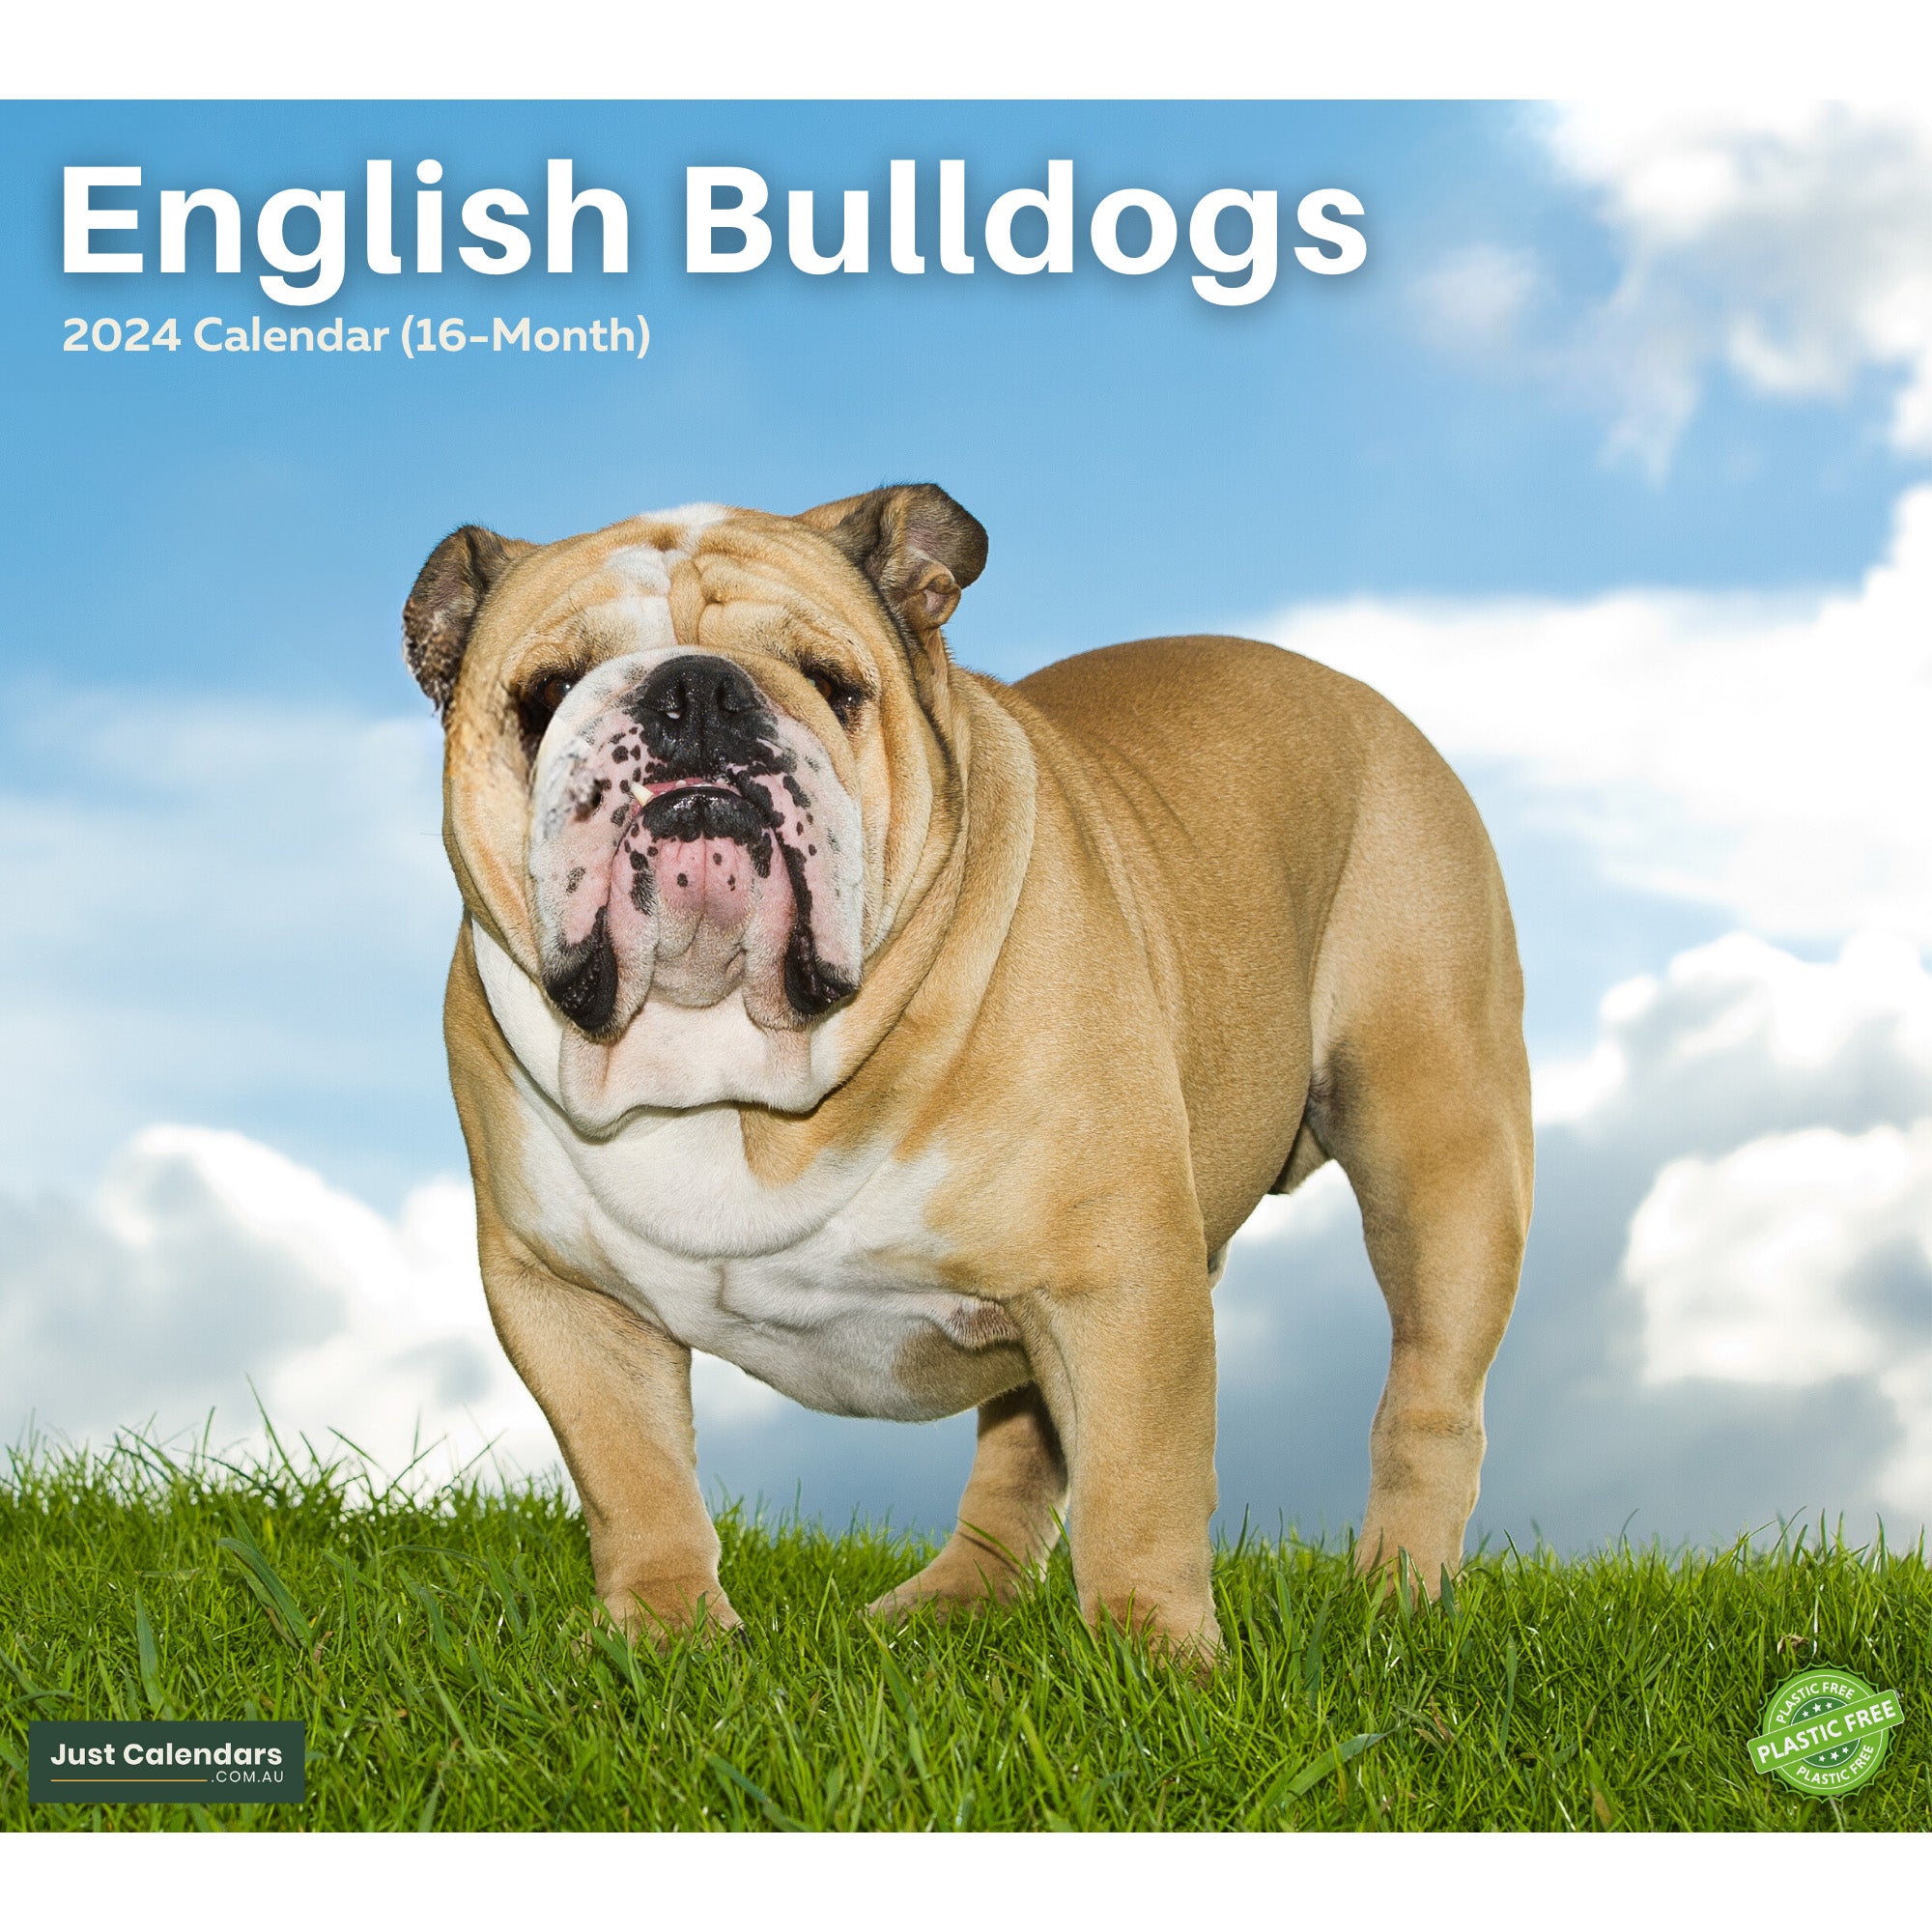 2024 English Bulldogs Dogs & Puppies - Deluxe Wall Calendar by Just Calendars - 16 Month - Plastic Free